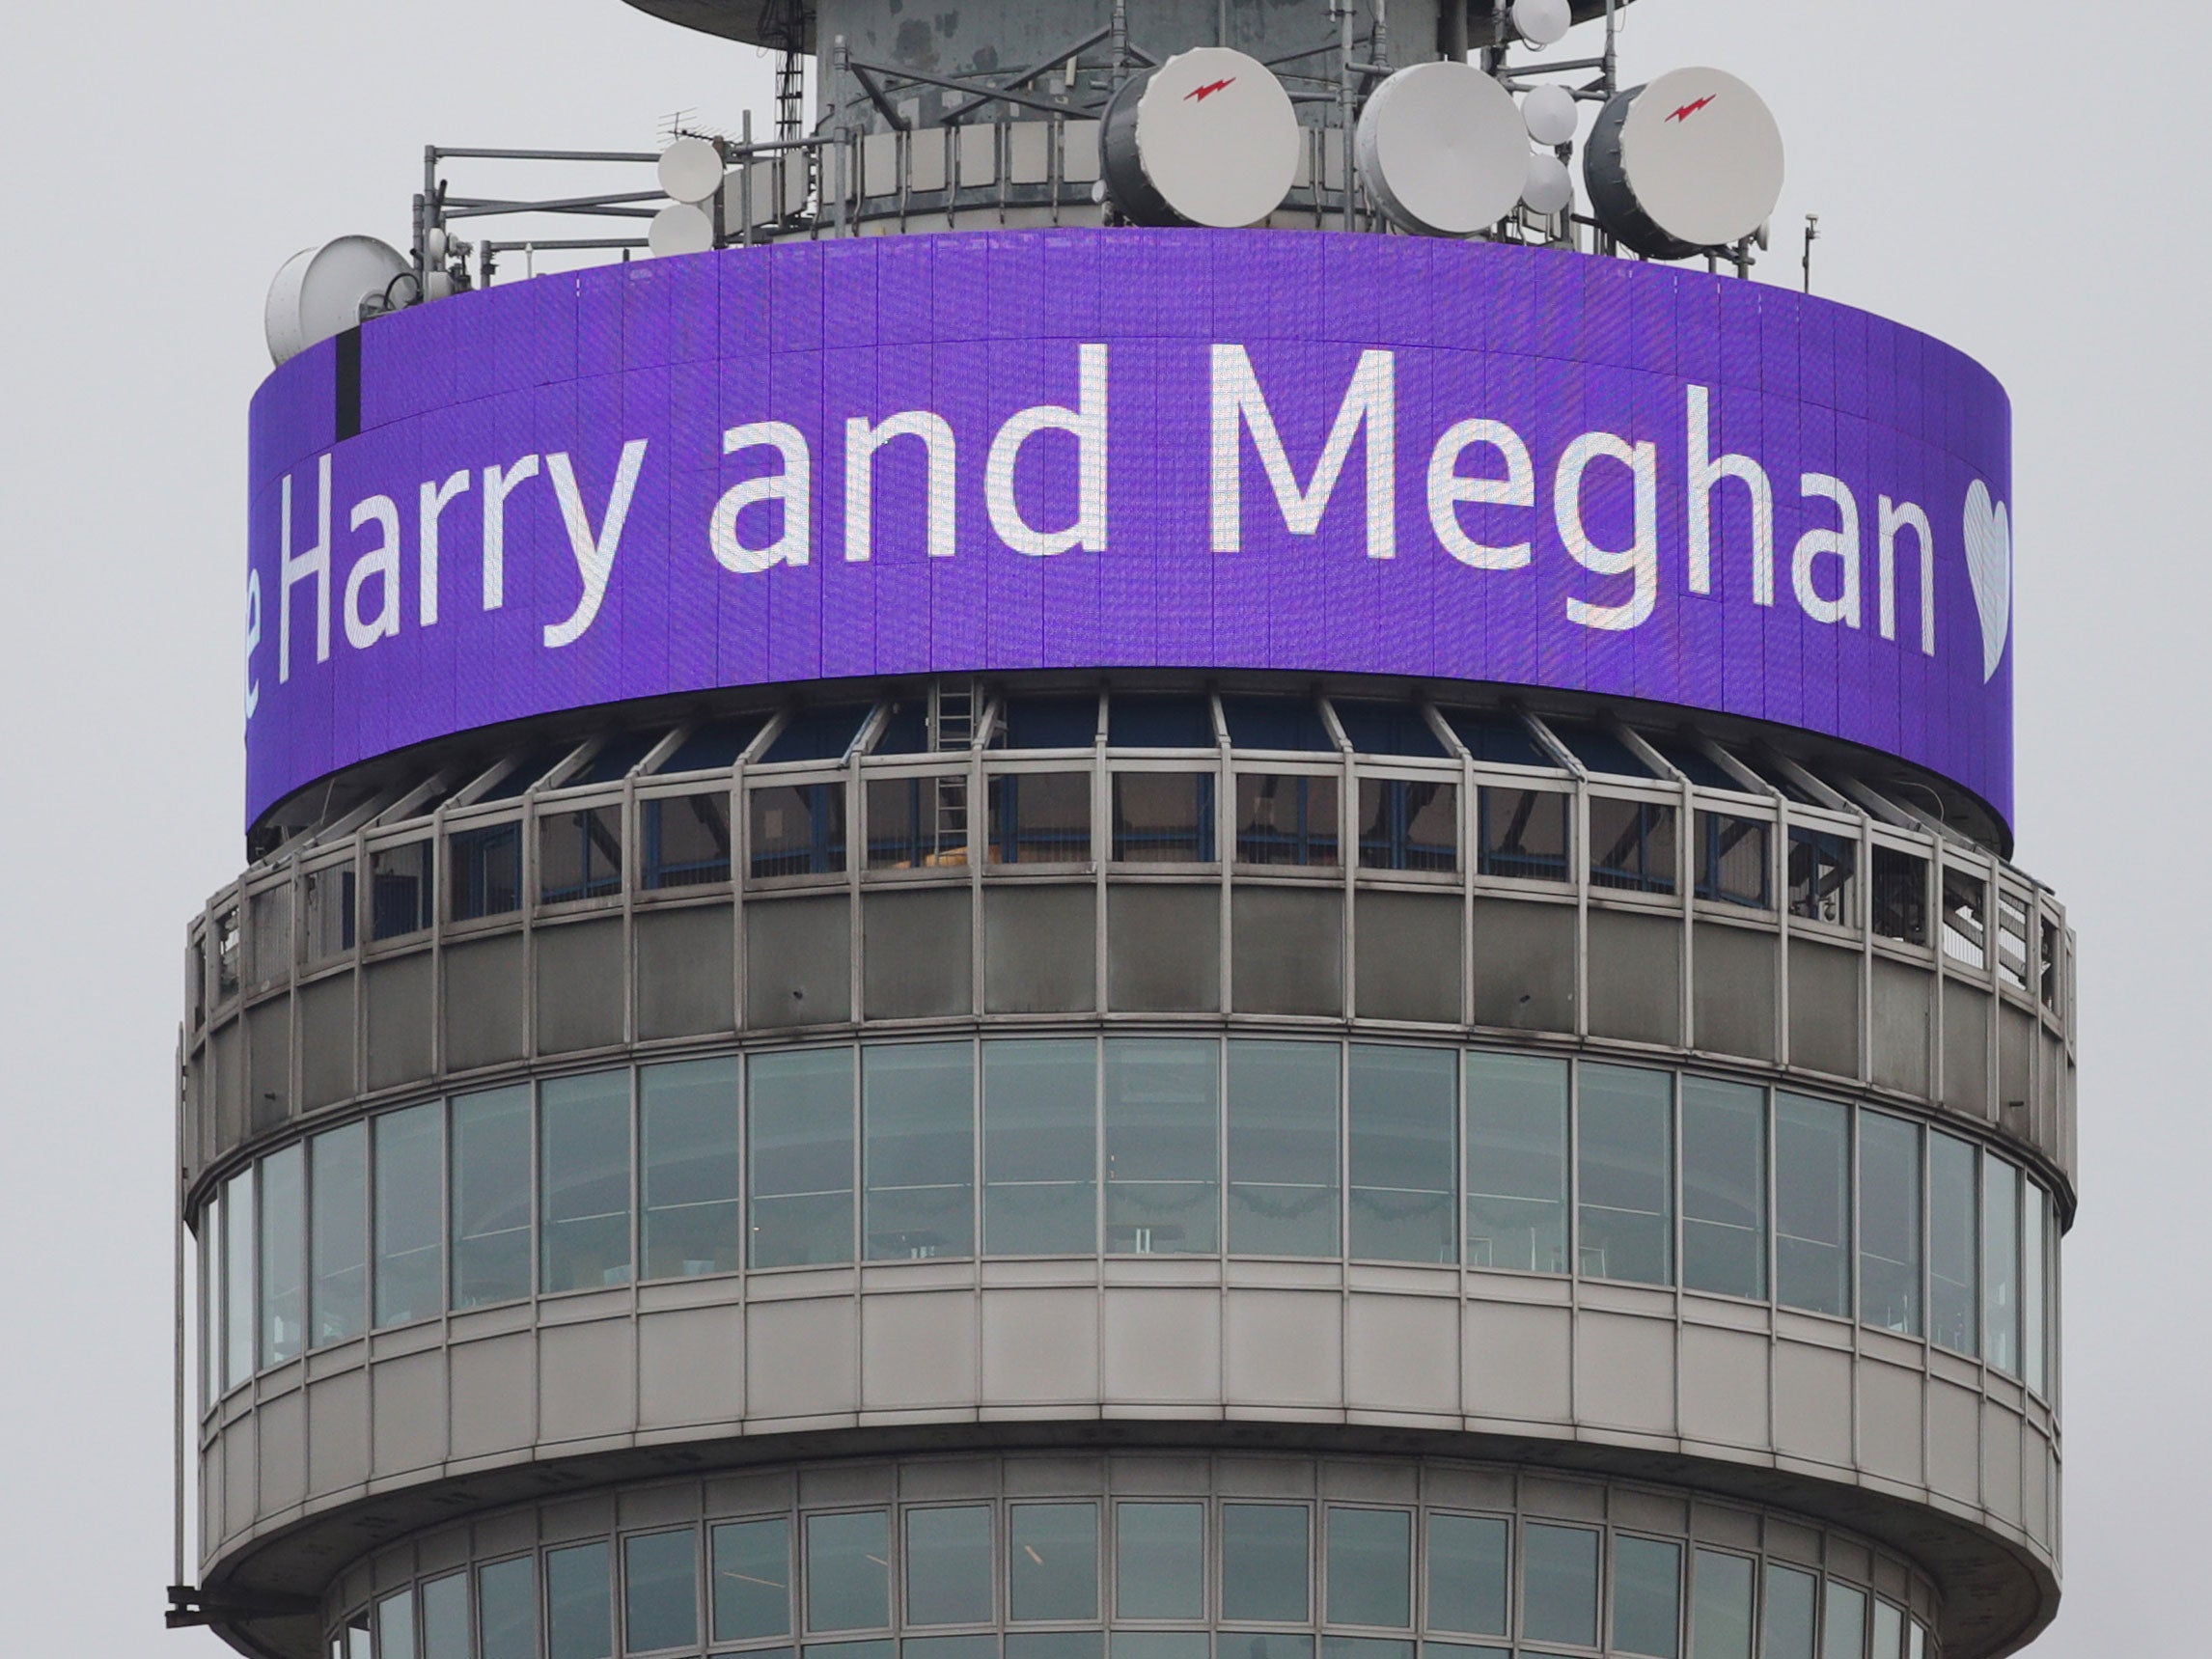 The BT Tower infoband beamed out the news of the Royal engagement. And the BT PR man emailed journalists to make sure everyone knew about it.